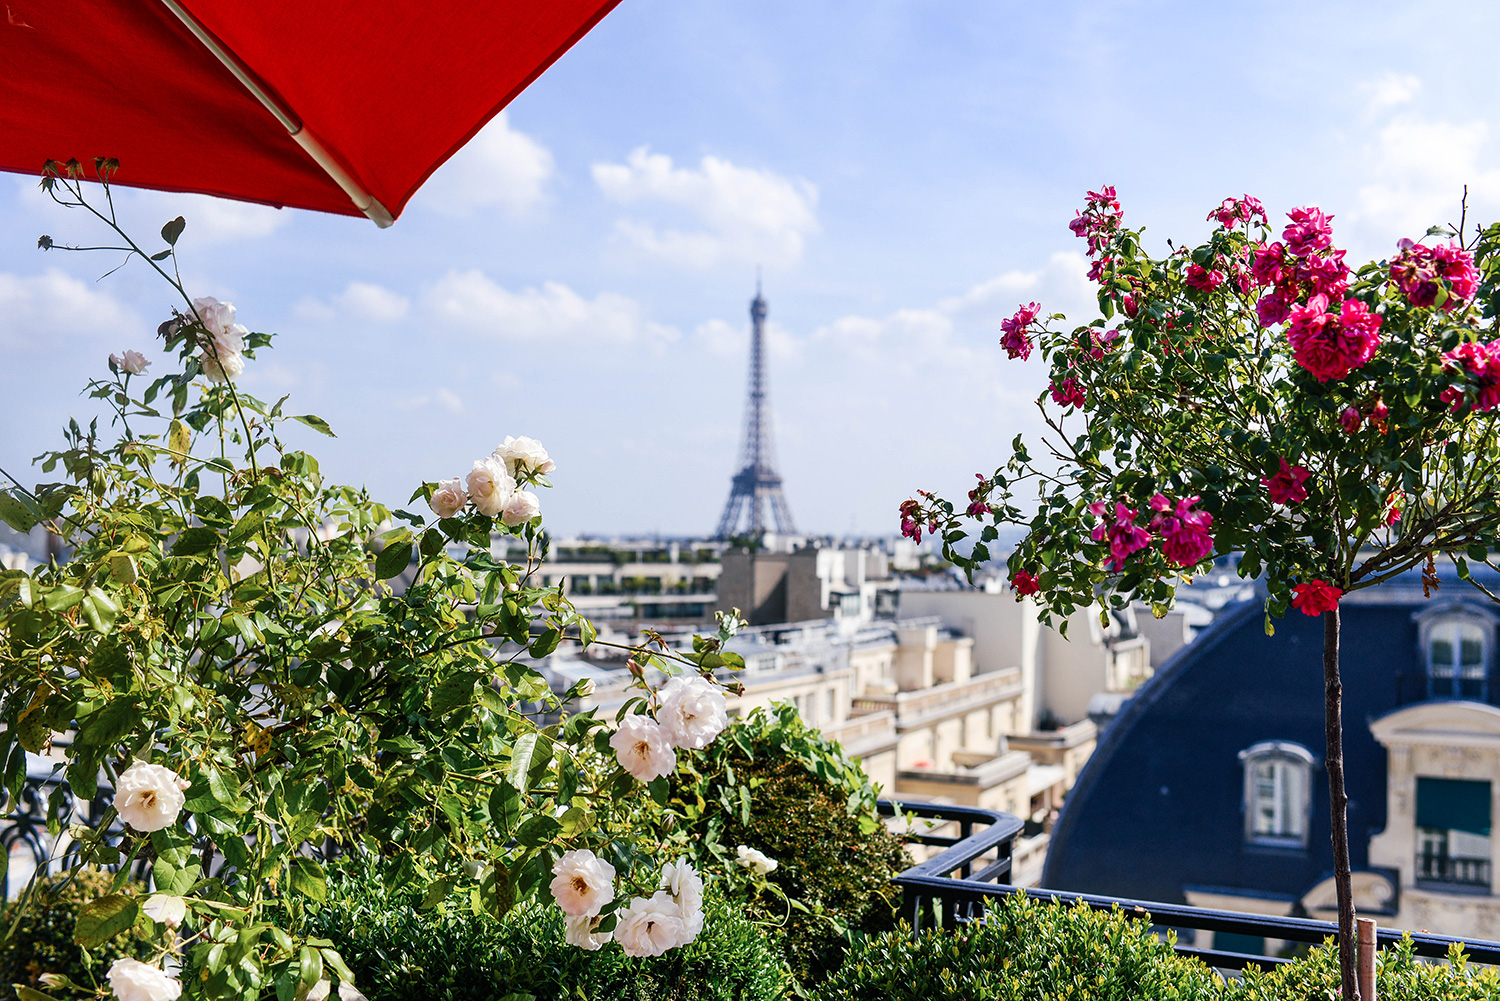 Where to Find and See The Best Views in Paris, France